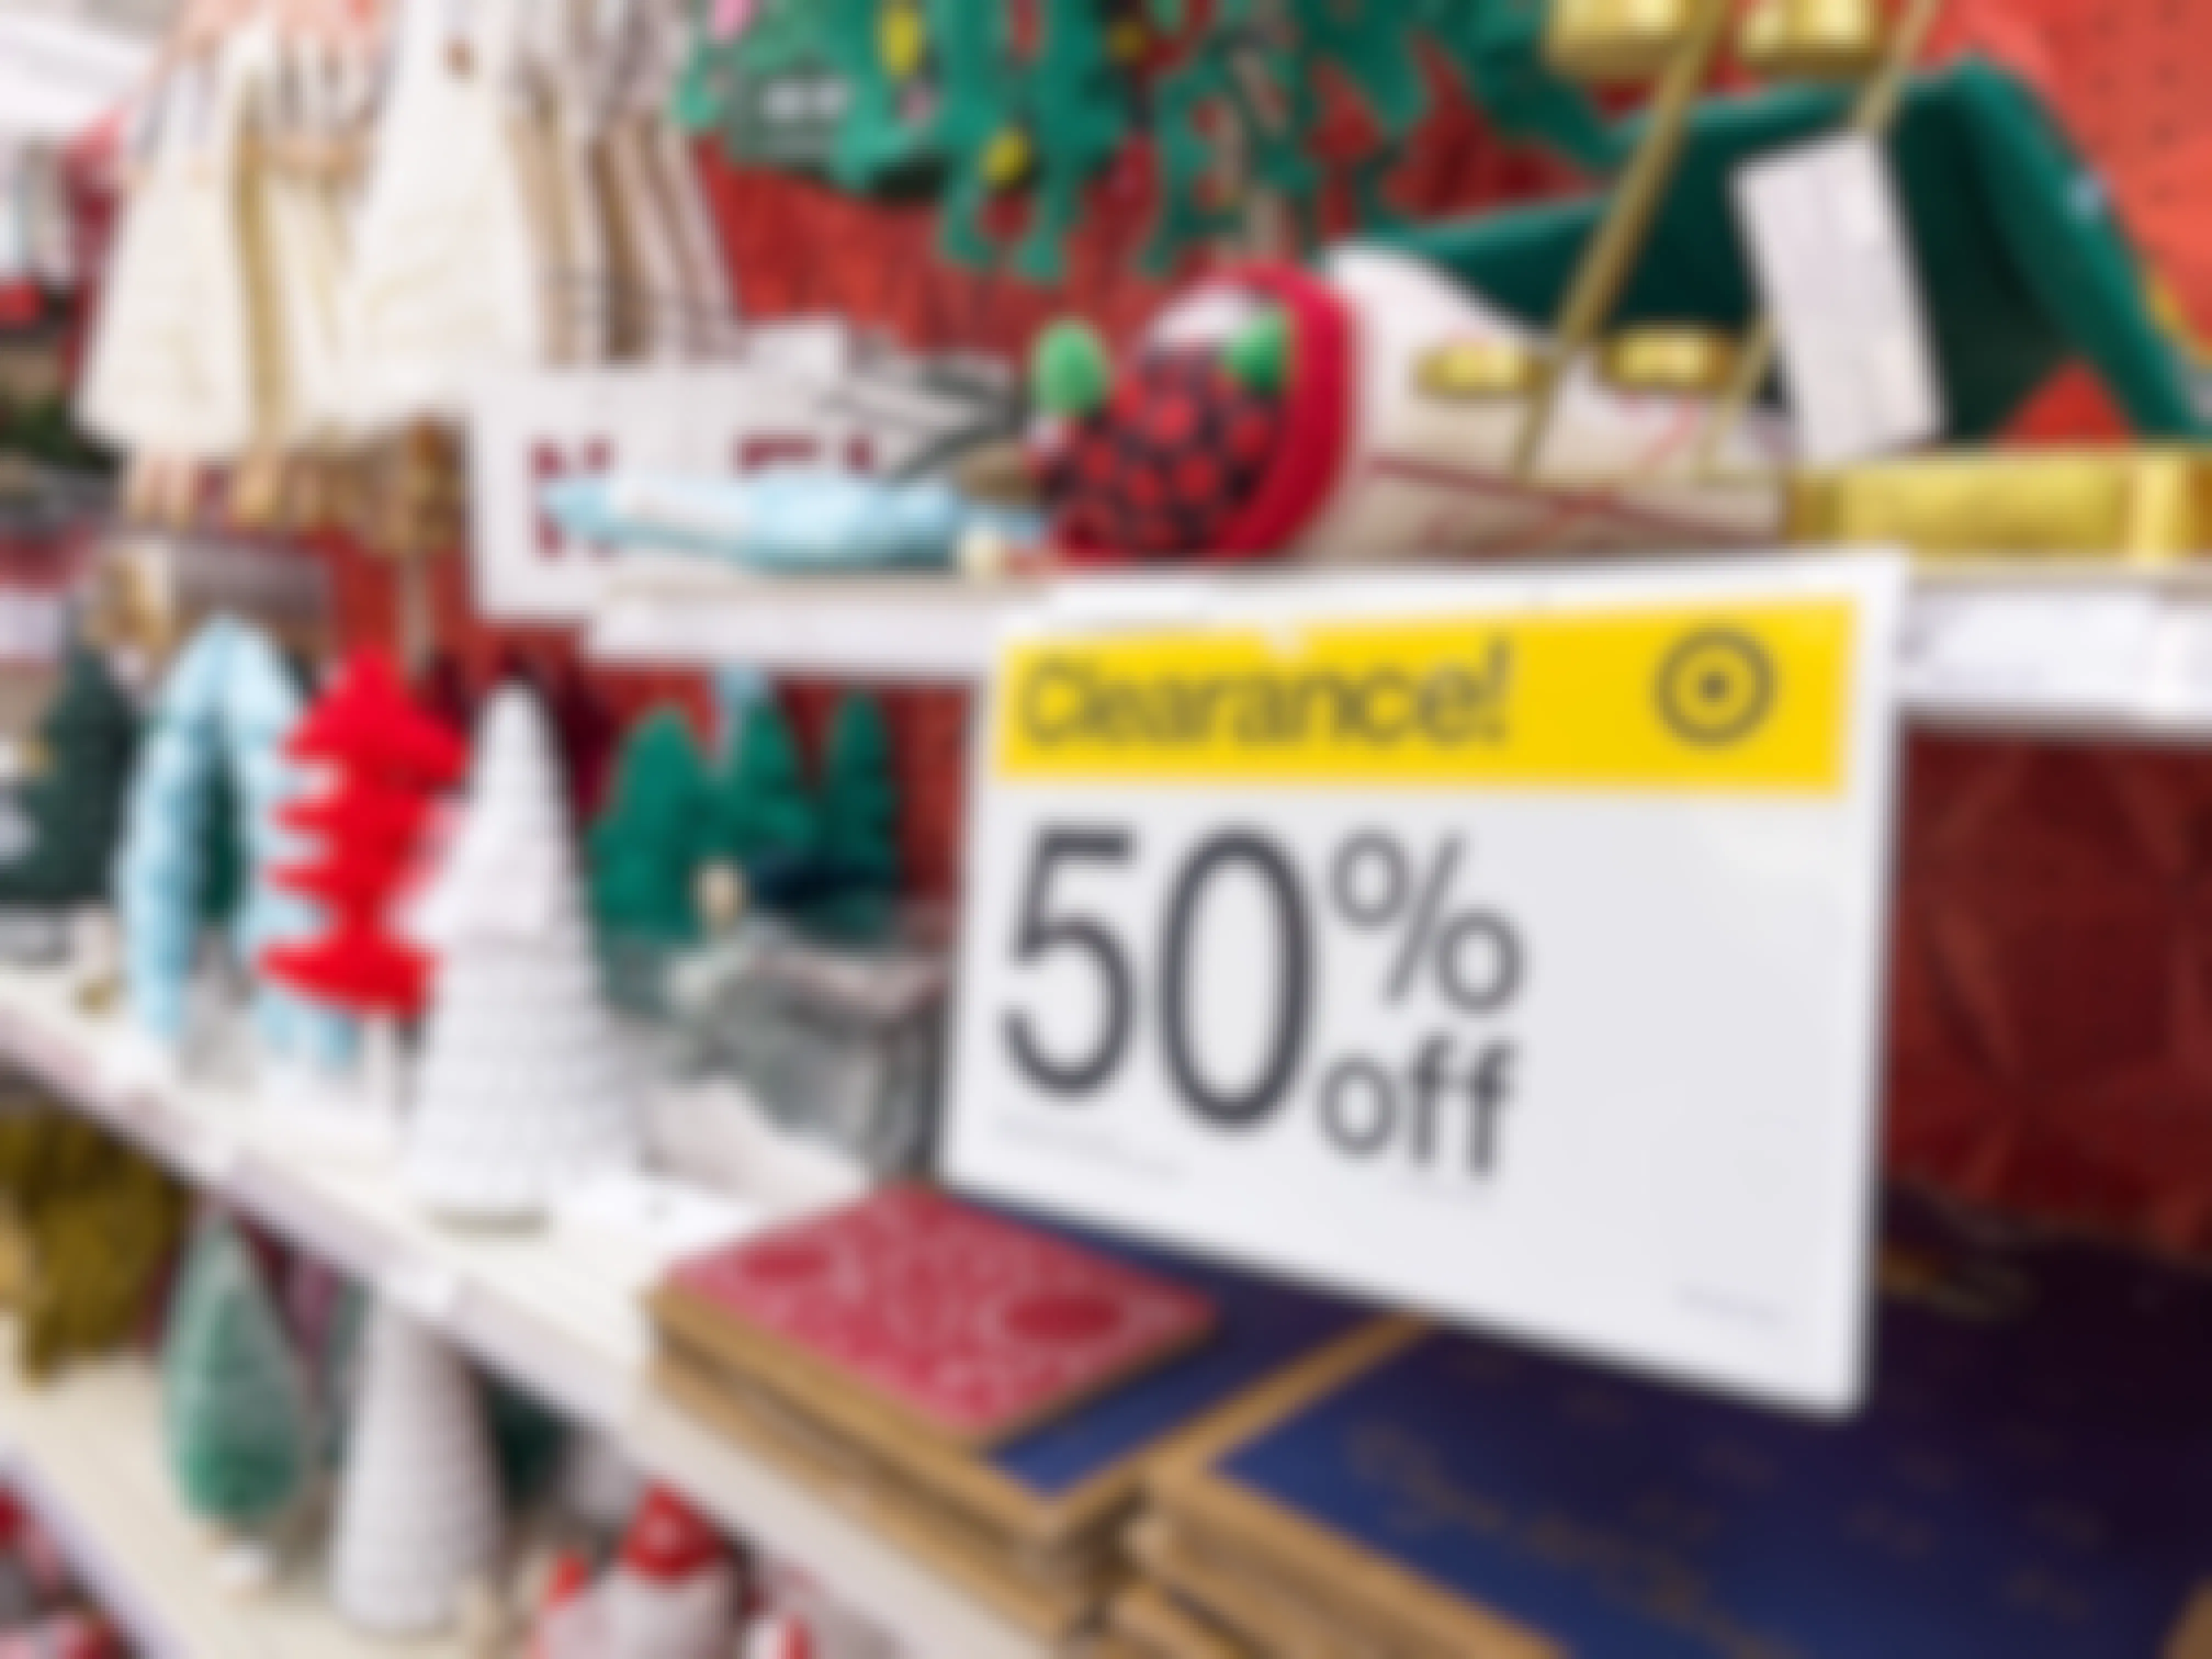 A 50% off clearance sign on a shelf of Christmas items at Target